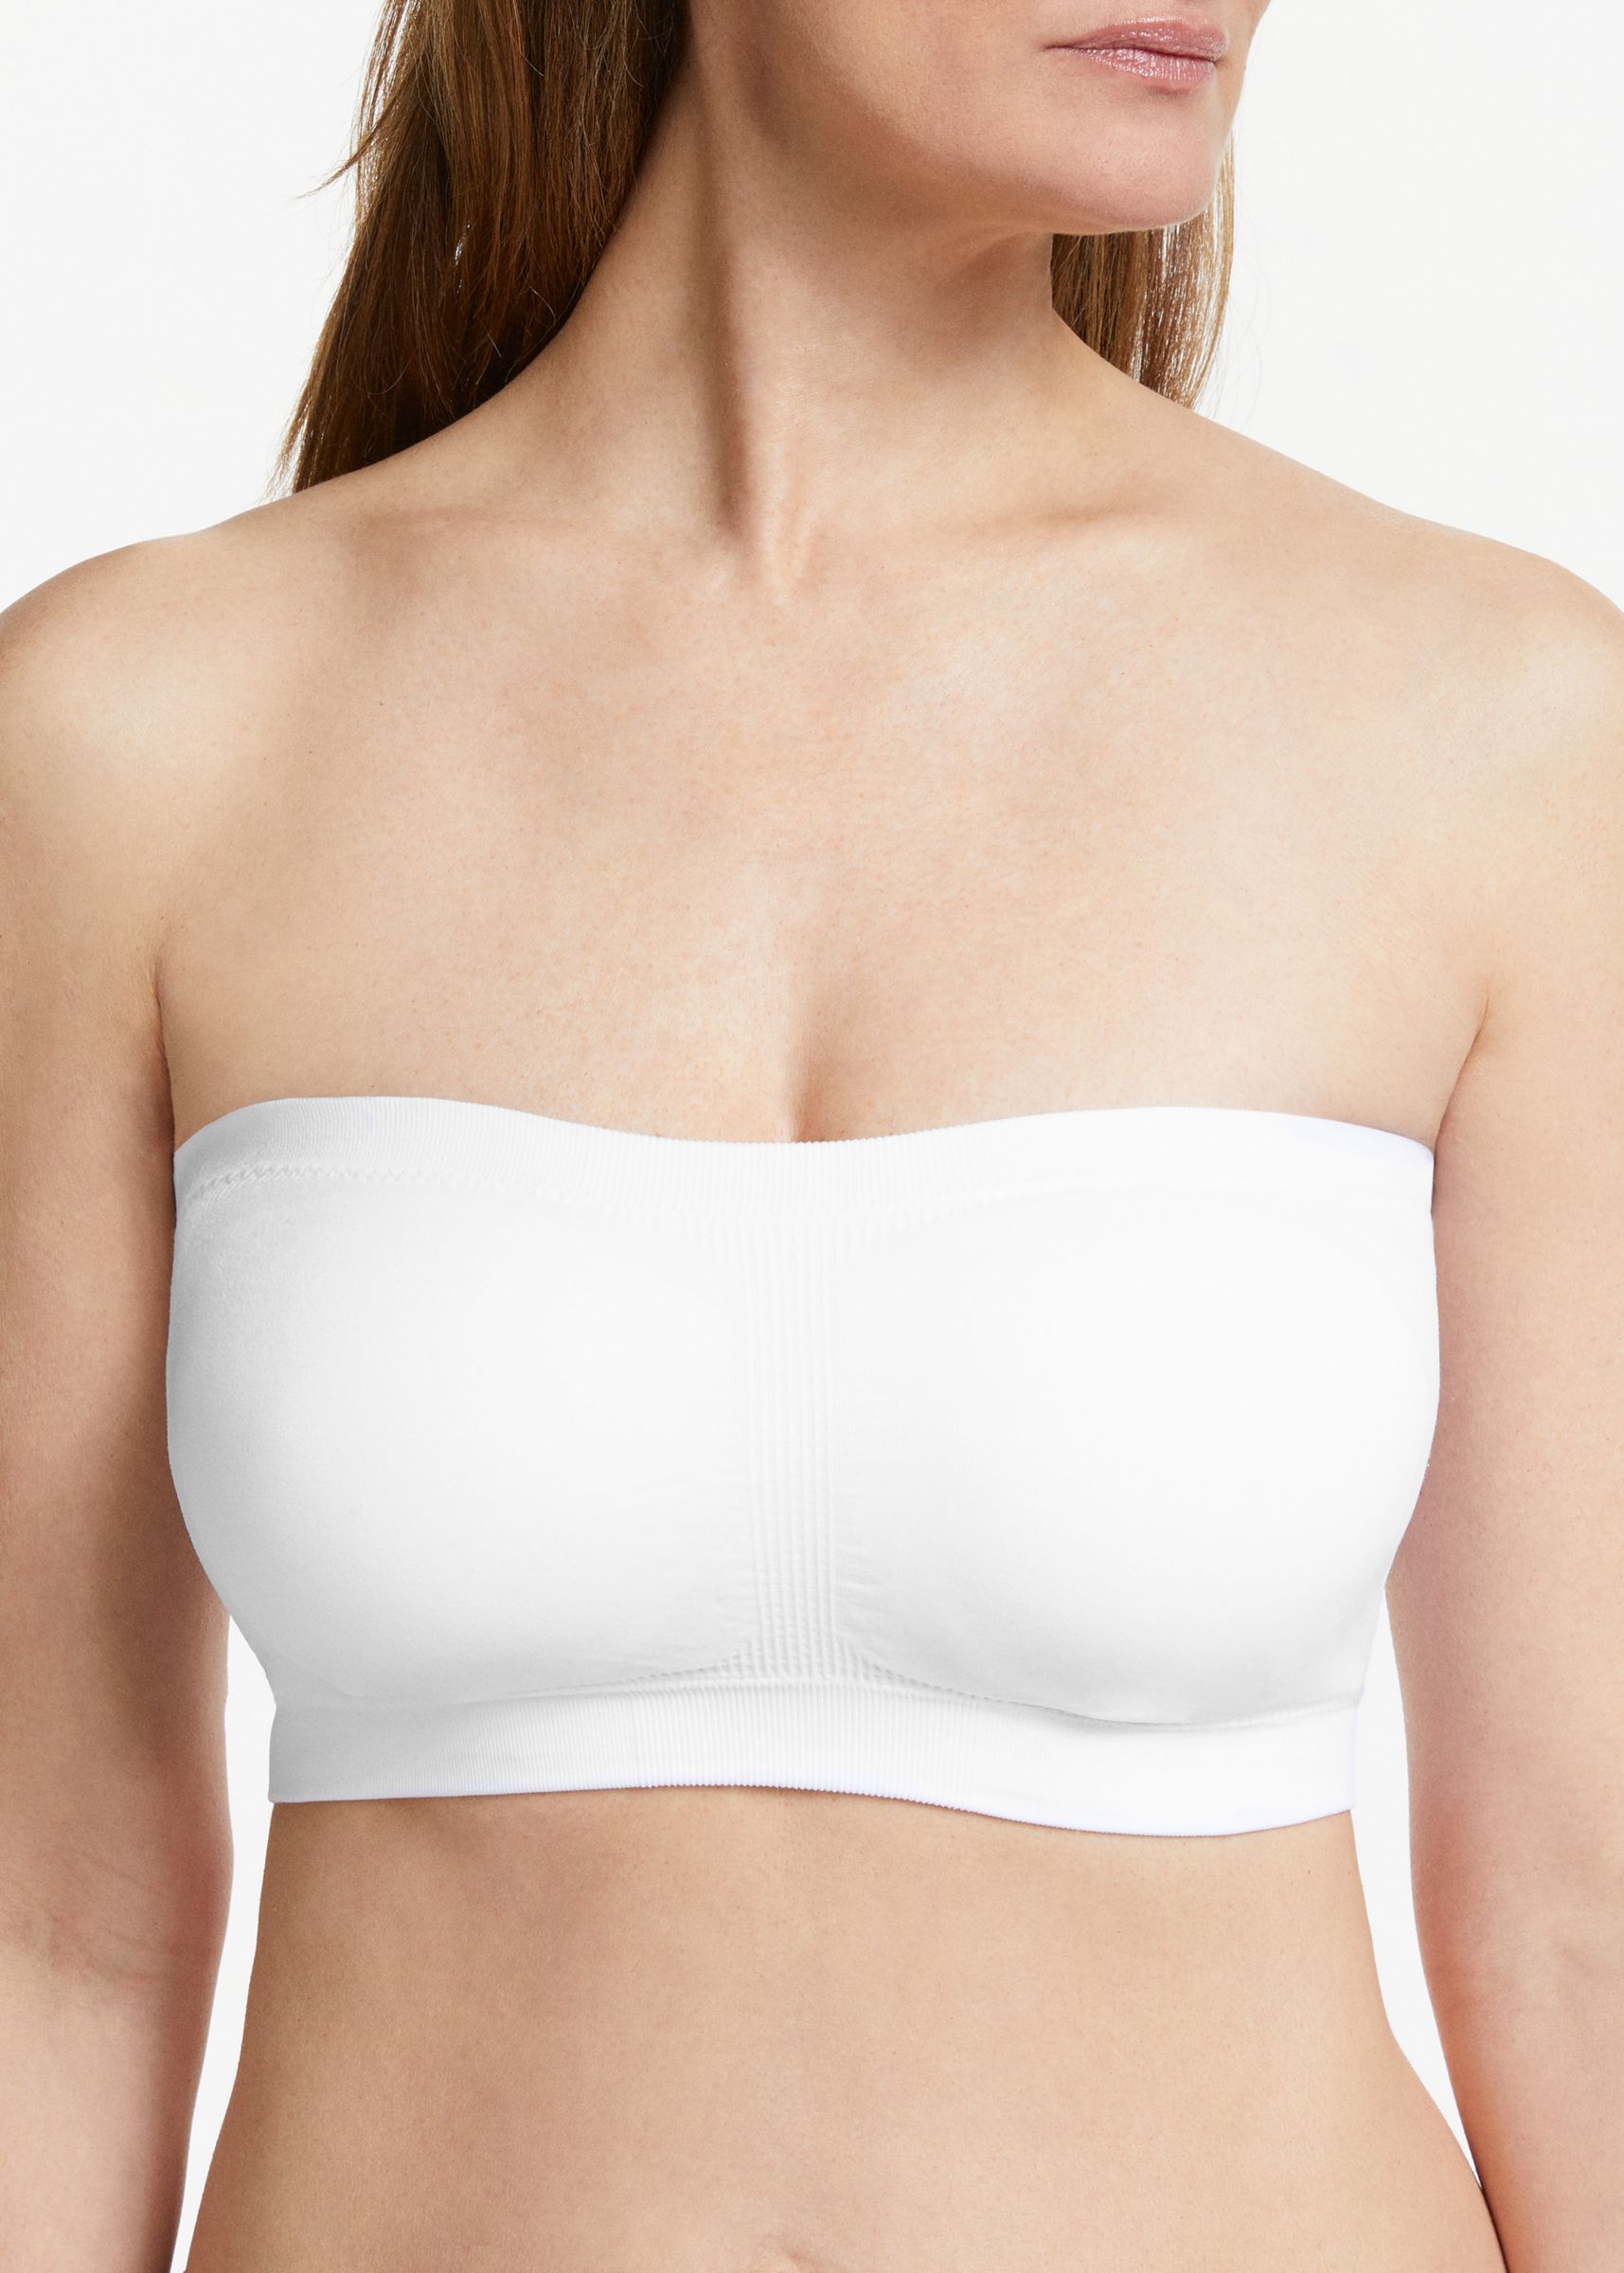 Air-ee Multi-Way Bandeau In Almond Nude (Signature Edition), 40% OFF